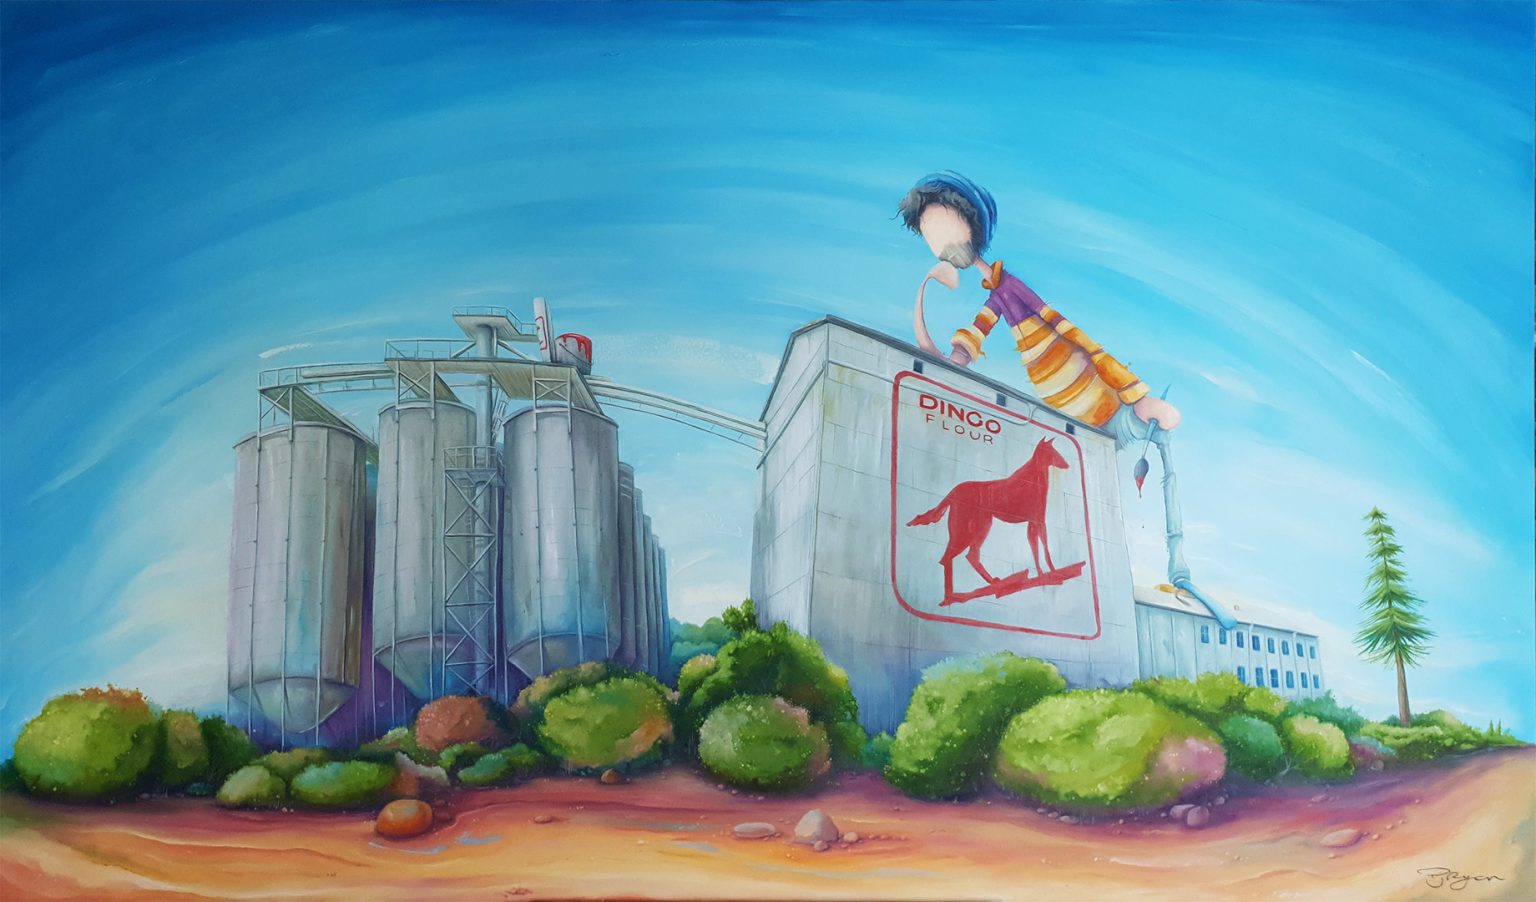 Peter Ryan's "Designing the Dingo Flour Mill" oil painting product